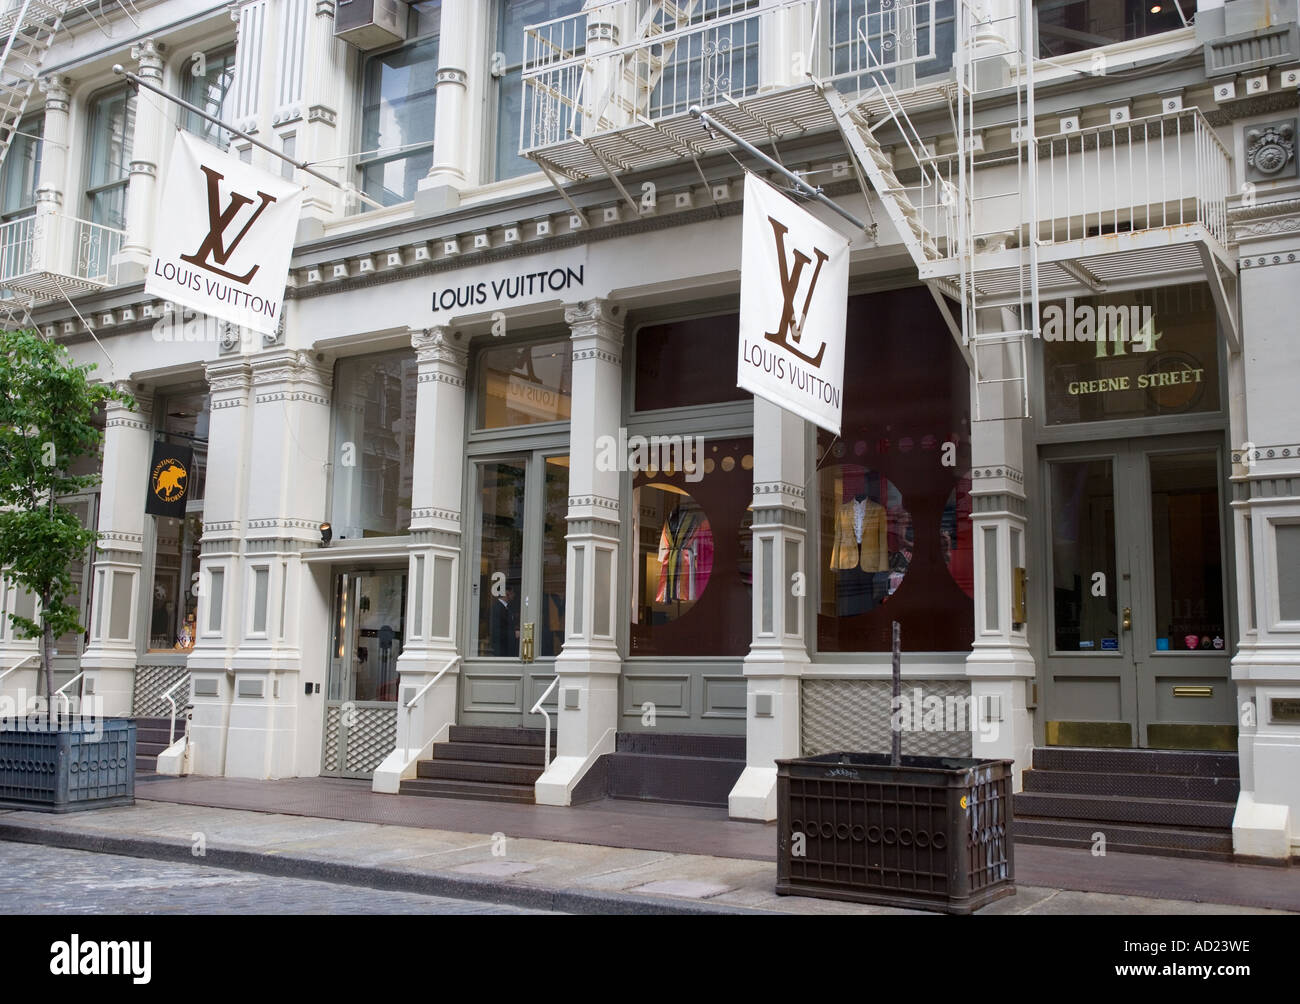 Louis Vuitton Online Shop New York | Confederated Tribes of the Umatilla Indian Reservation